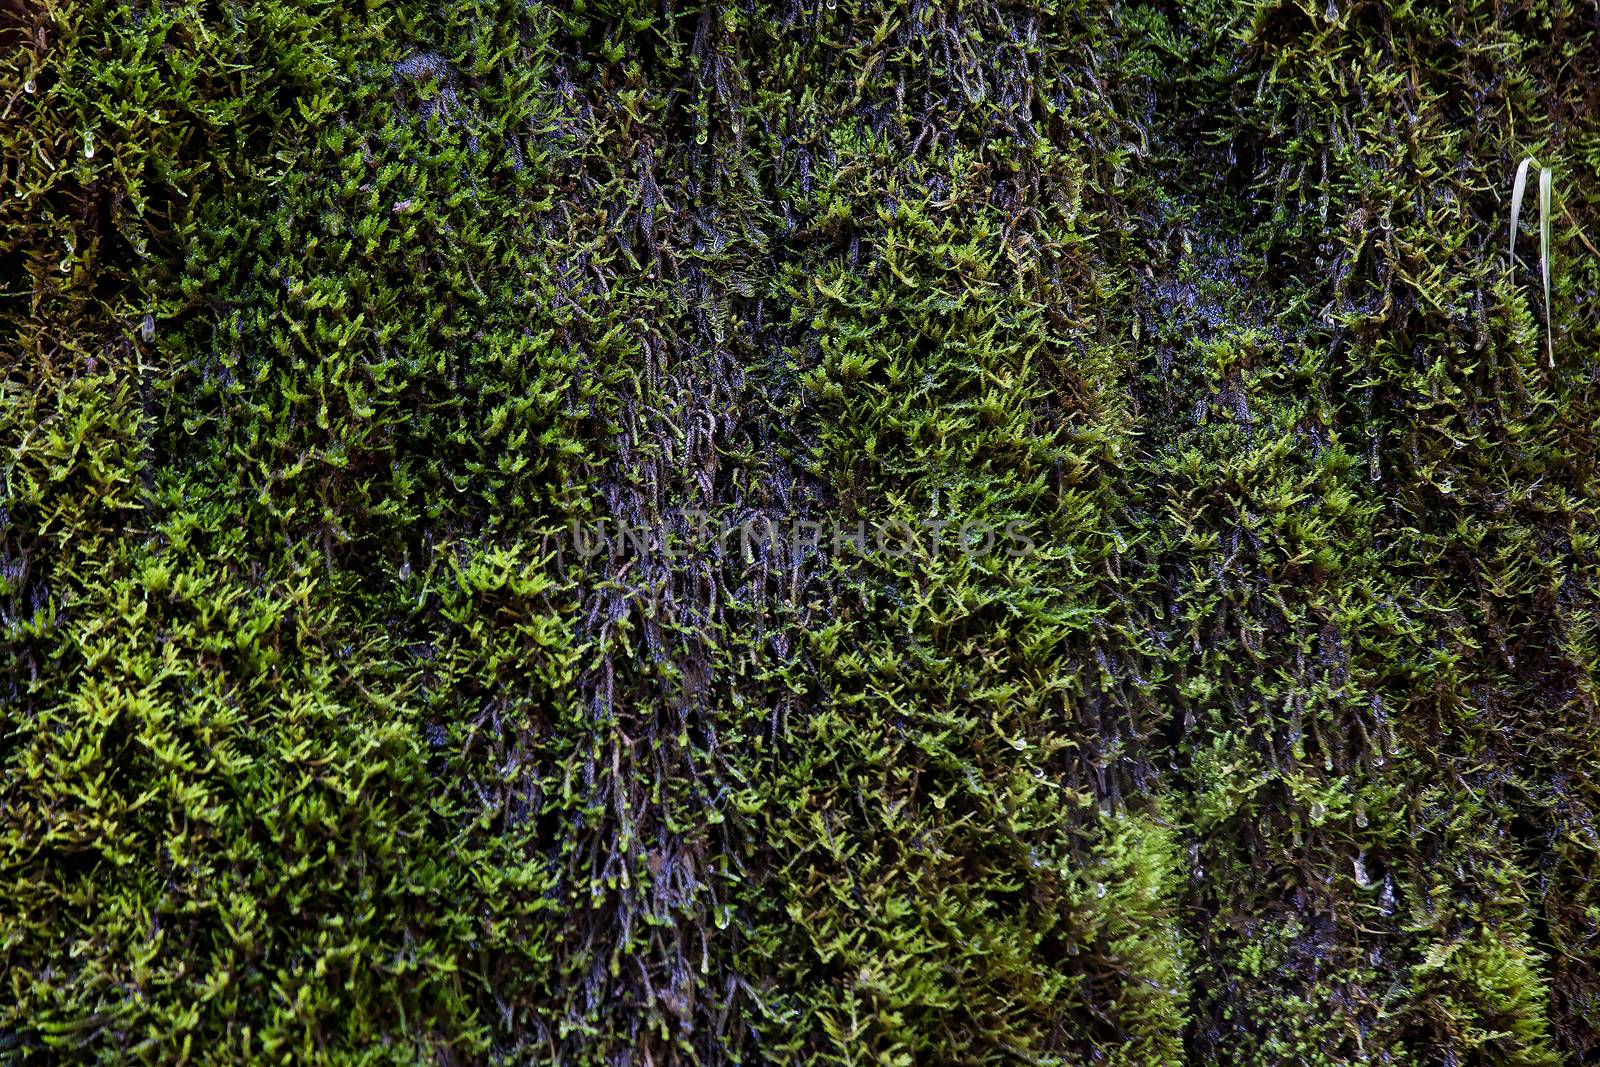 Green wet moss with dropping water, suitable for background. Horizontal image.